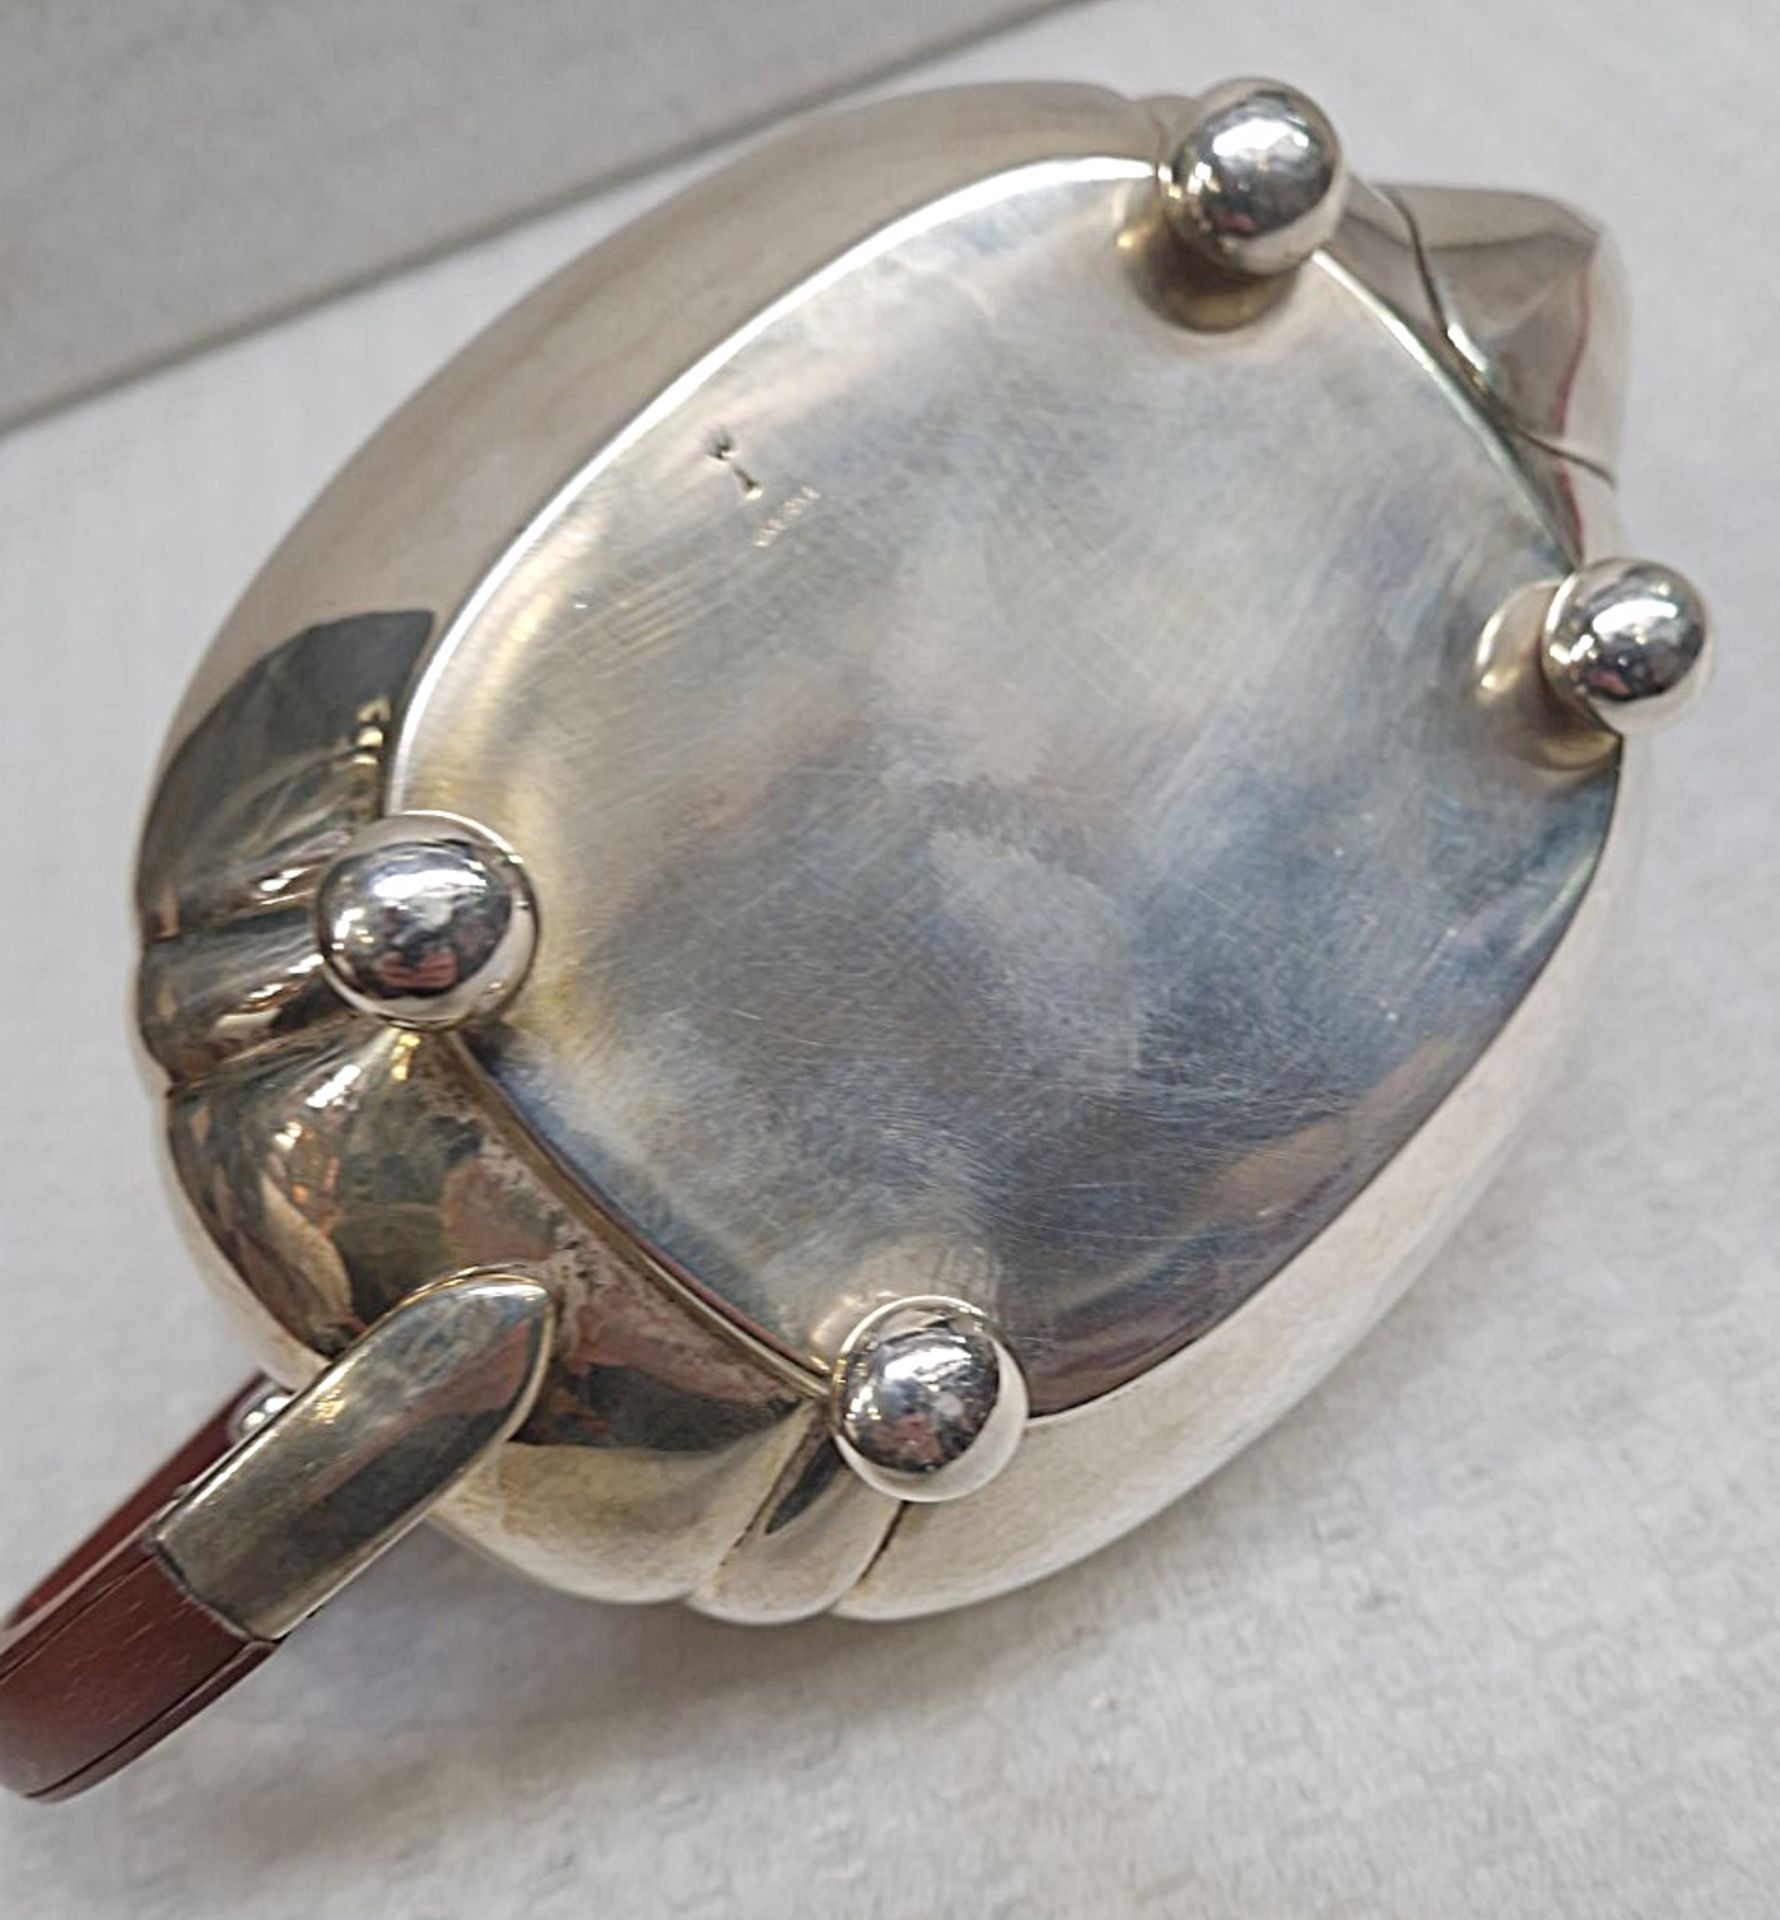 1 x ELKINGTON & CO Sterling Silver Teapot In 'George I' Style Hinged Top & Pear Wood Handle - Image 3 of 7